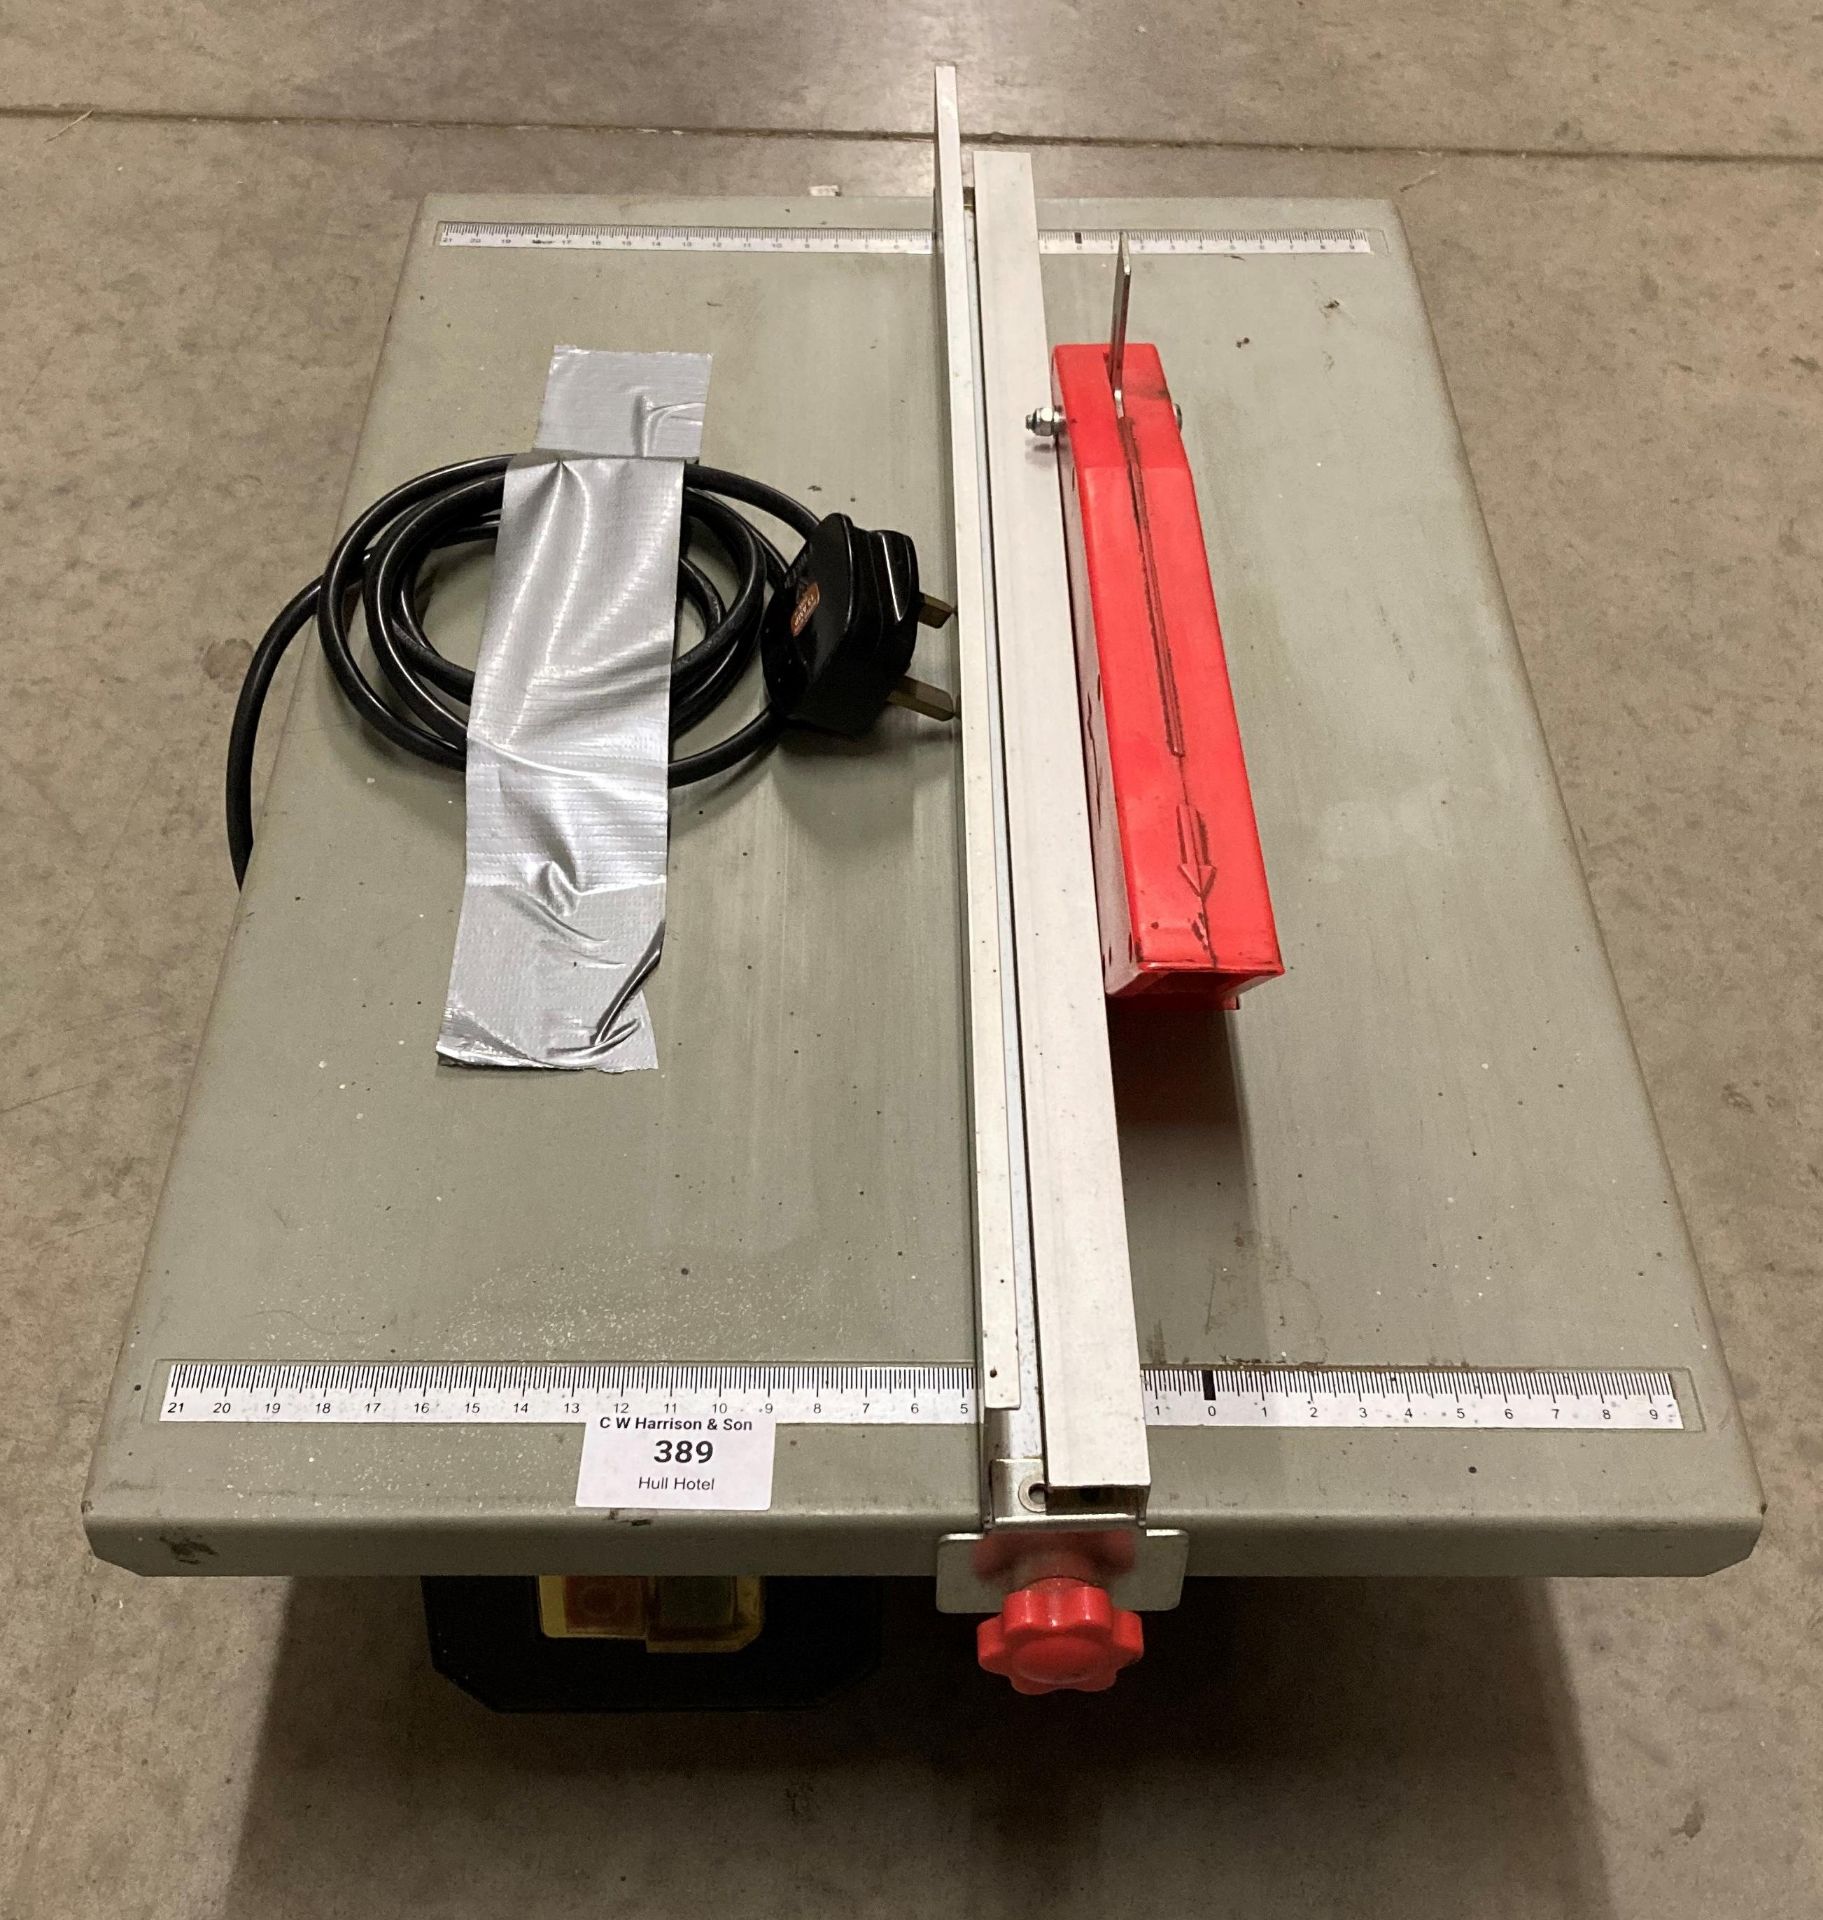 Unbranded table-top table saw (240v),